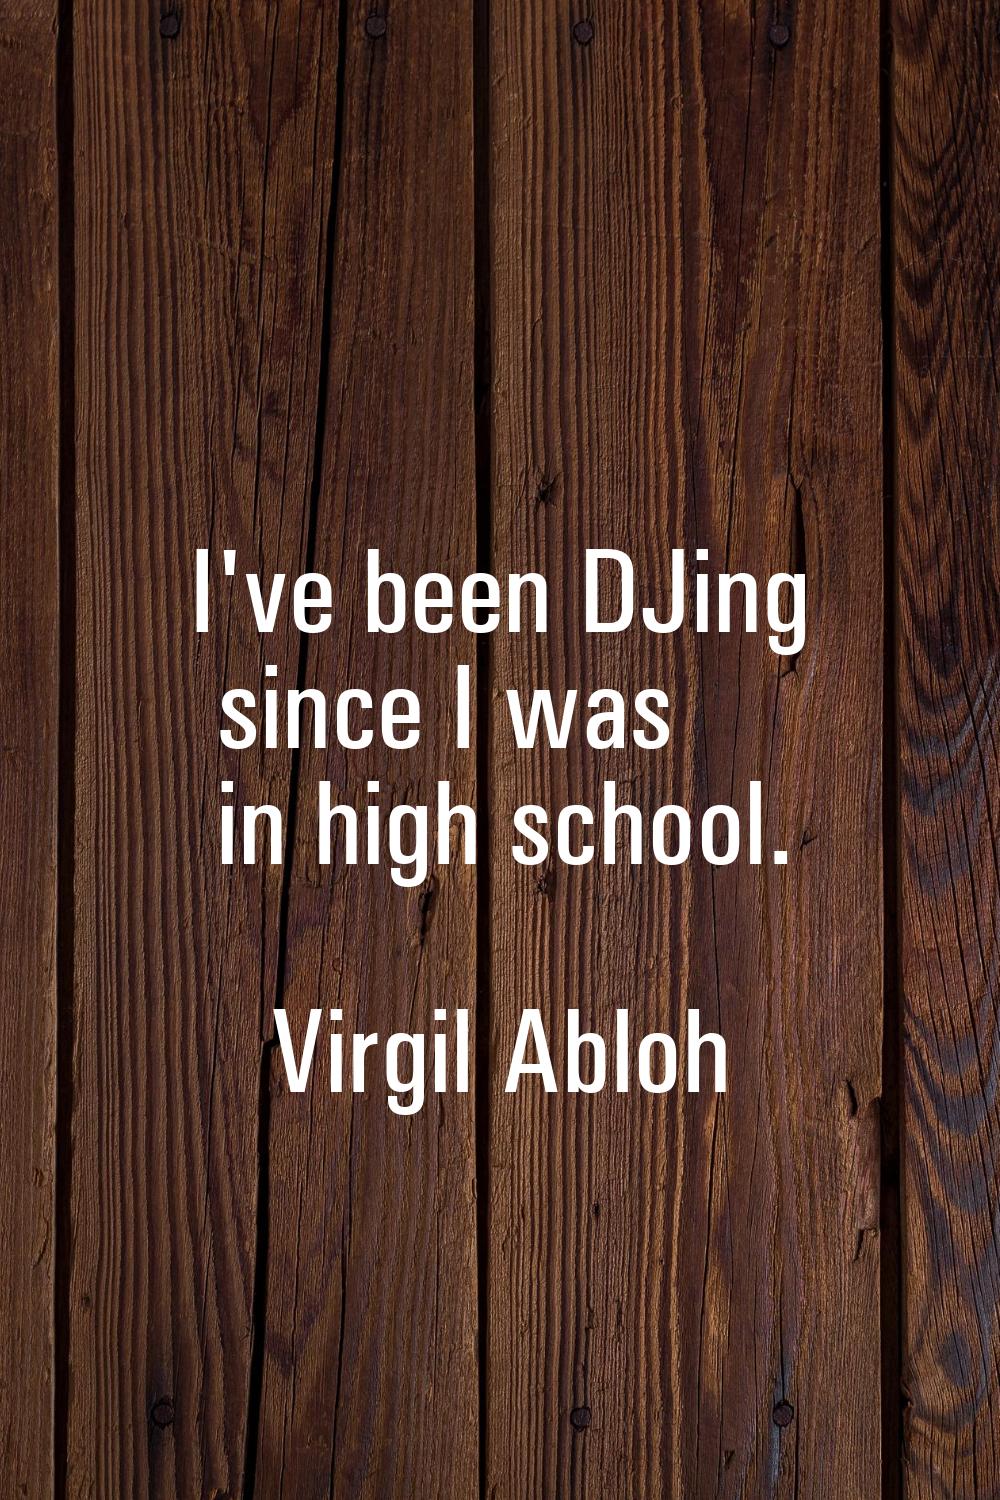 I've been DJing since I was in high school.